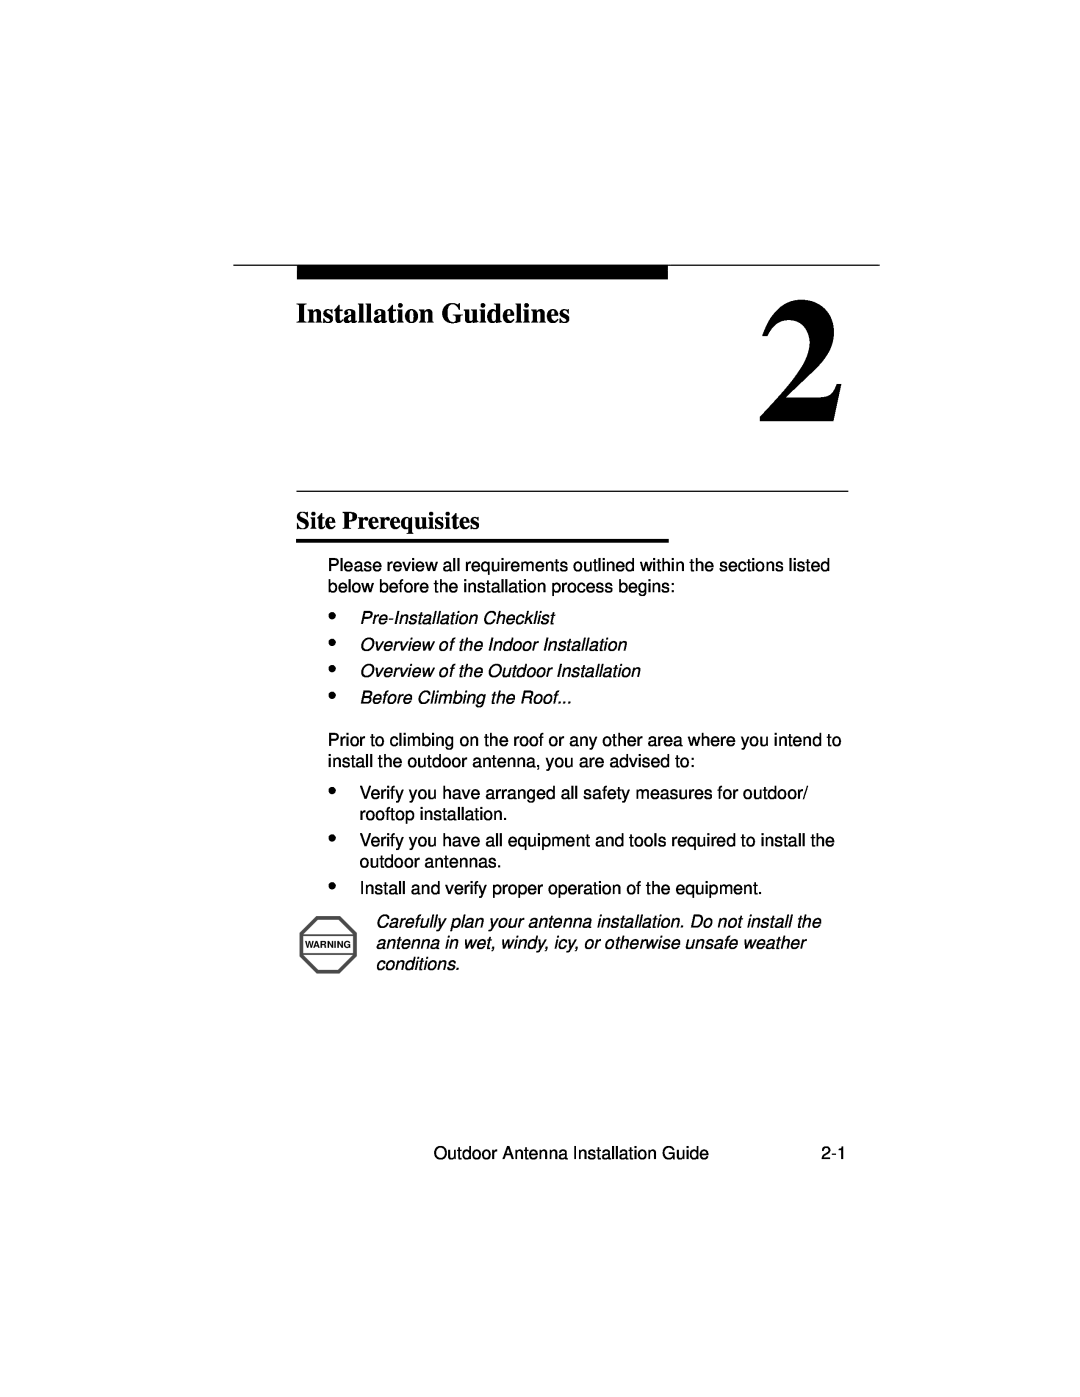 Cabletron Systems 9033073 manual Installation Guidelines, Site Prerequisites 